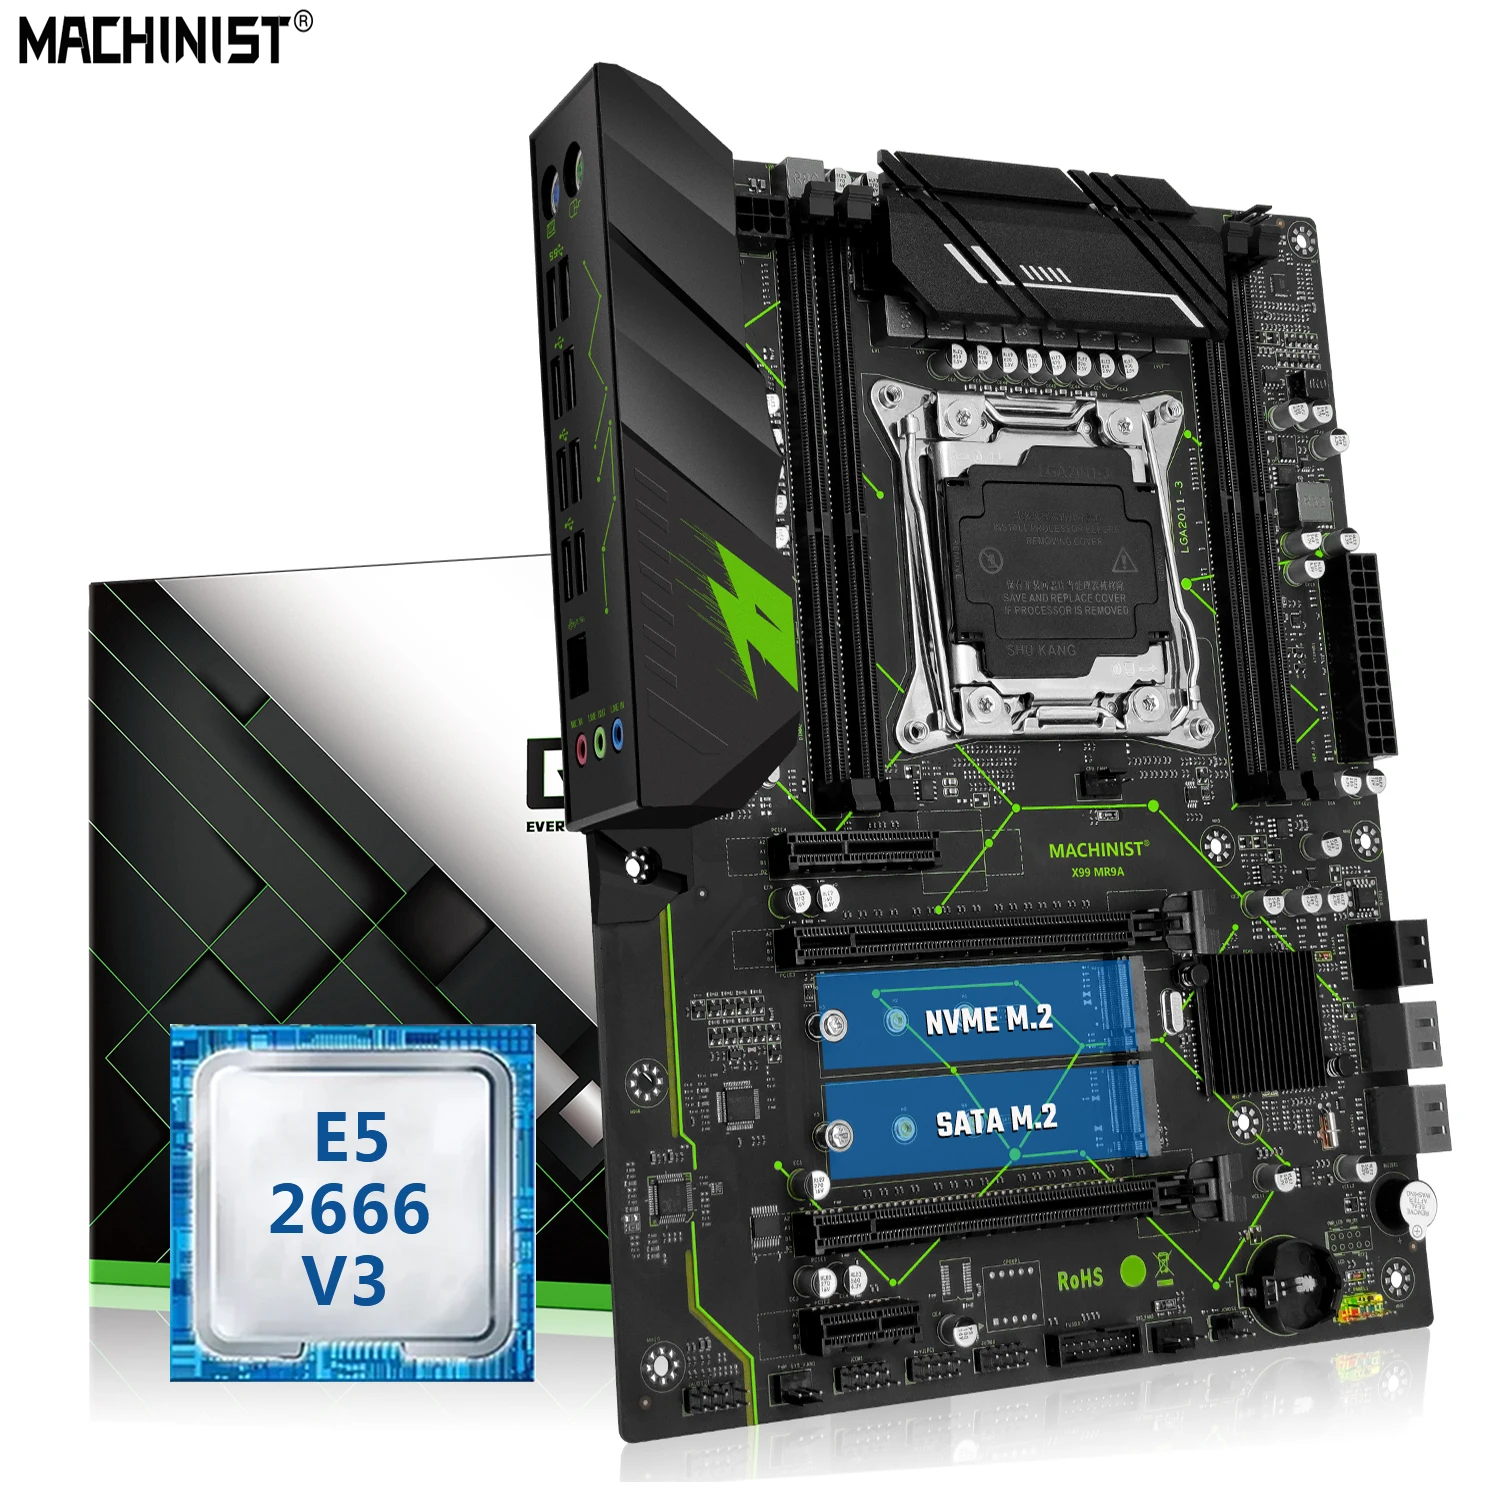 MACHINIST X99 Motherboard LGA 2011-3 With Xeon E5 2666 V3 CPU Processor Kit Set Support DDR4 RAM Four-channel X99-MR9A